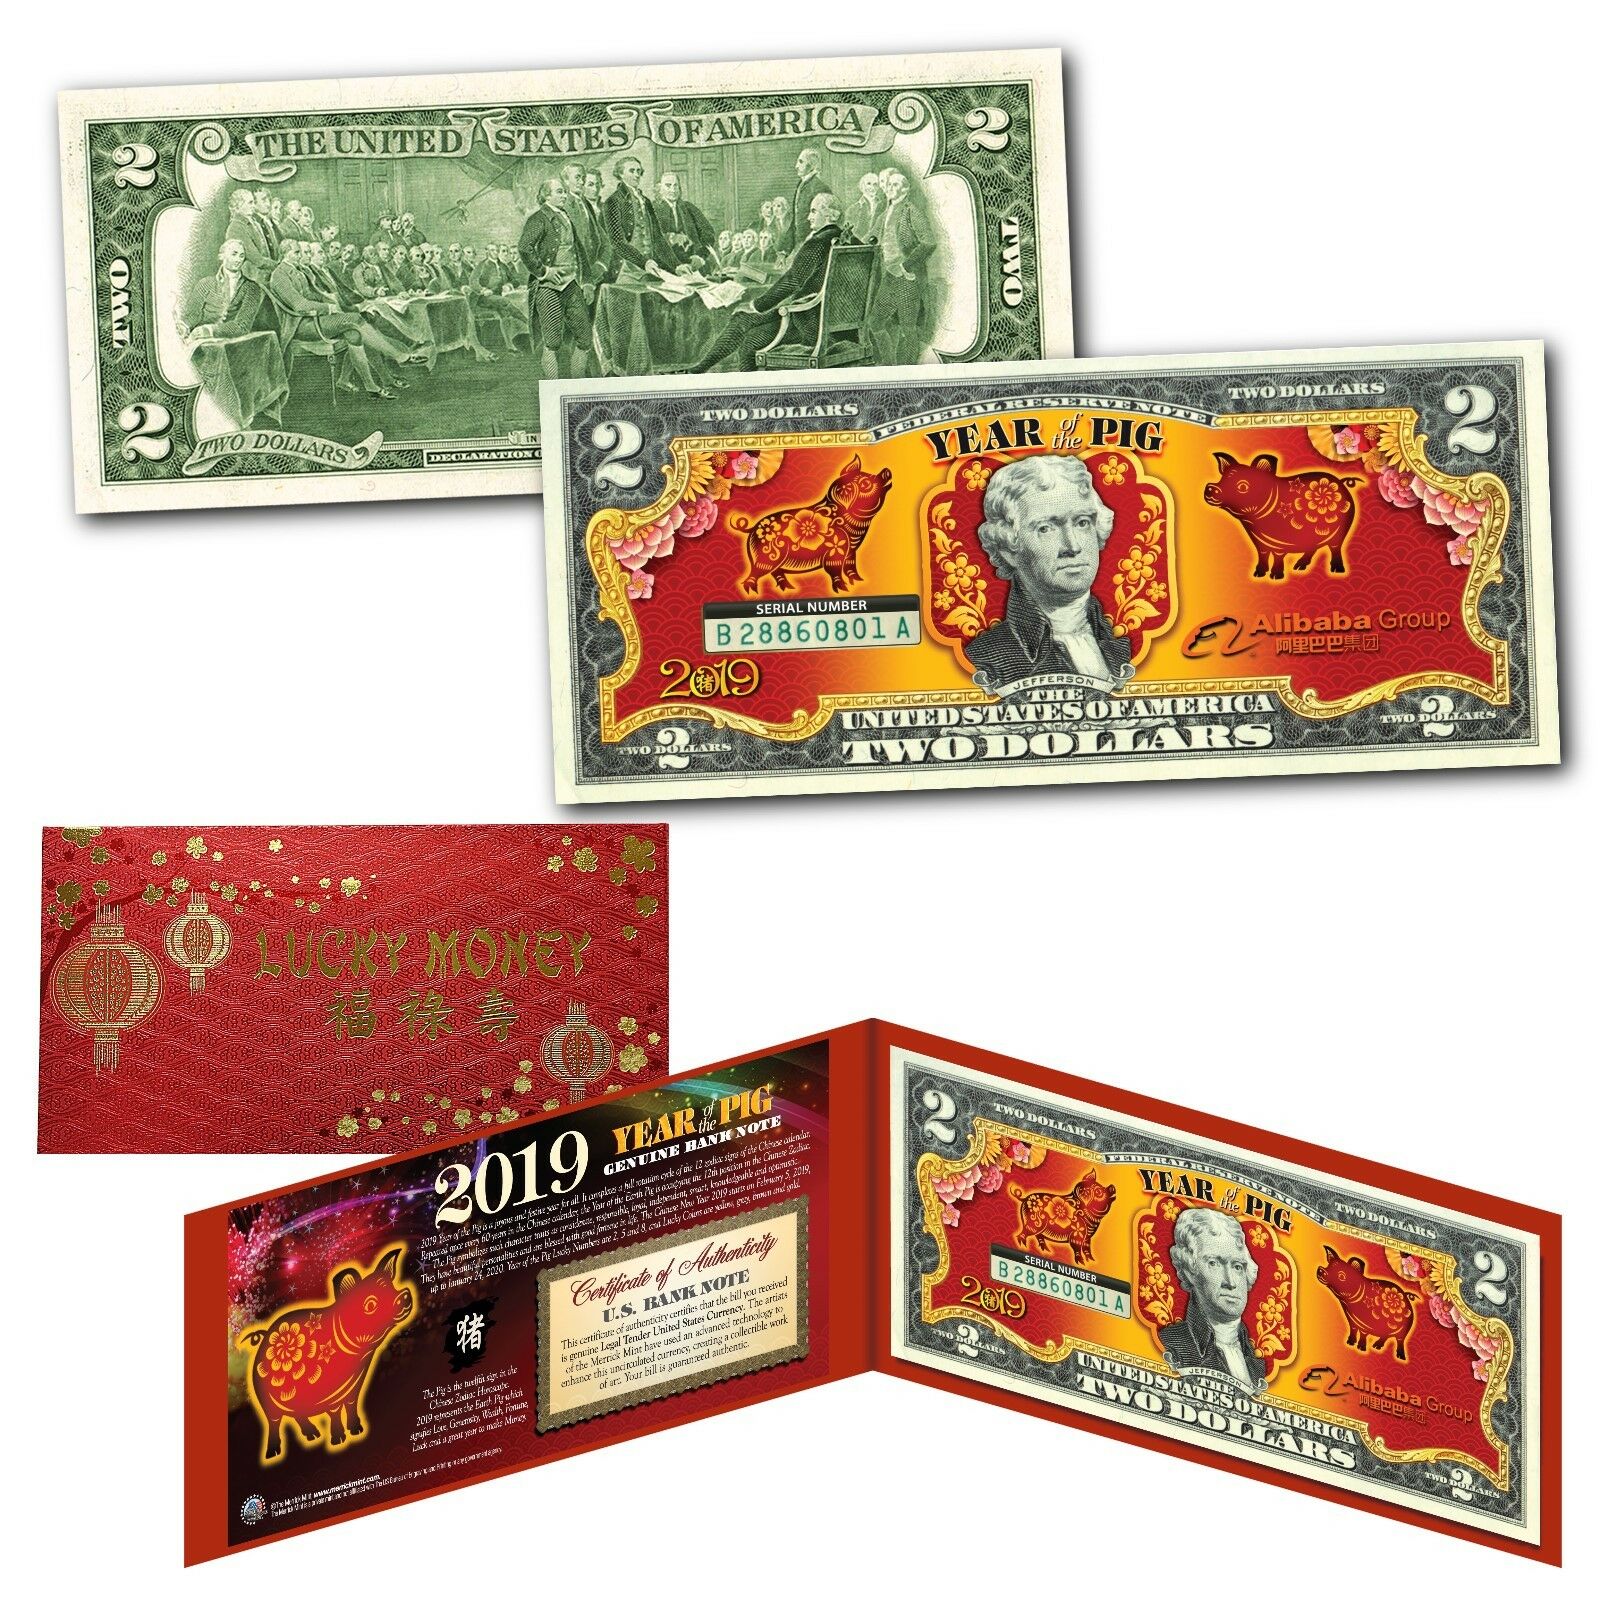 Bill RED 2019 CNY Lunar Chinese New YEAR OF THE PIG Polychromatic 8 Pigs $2 U.S 